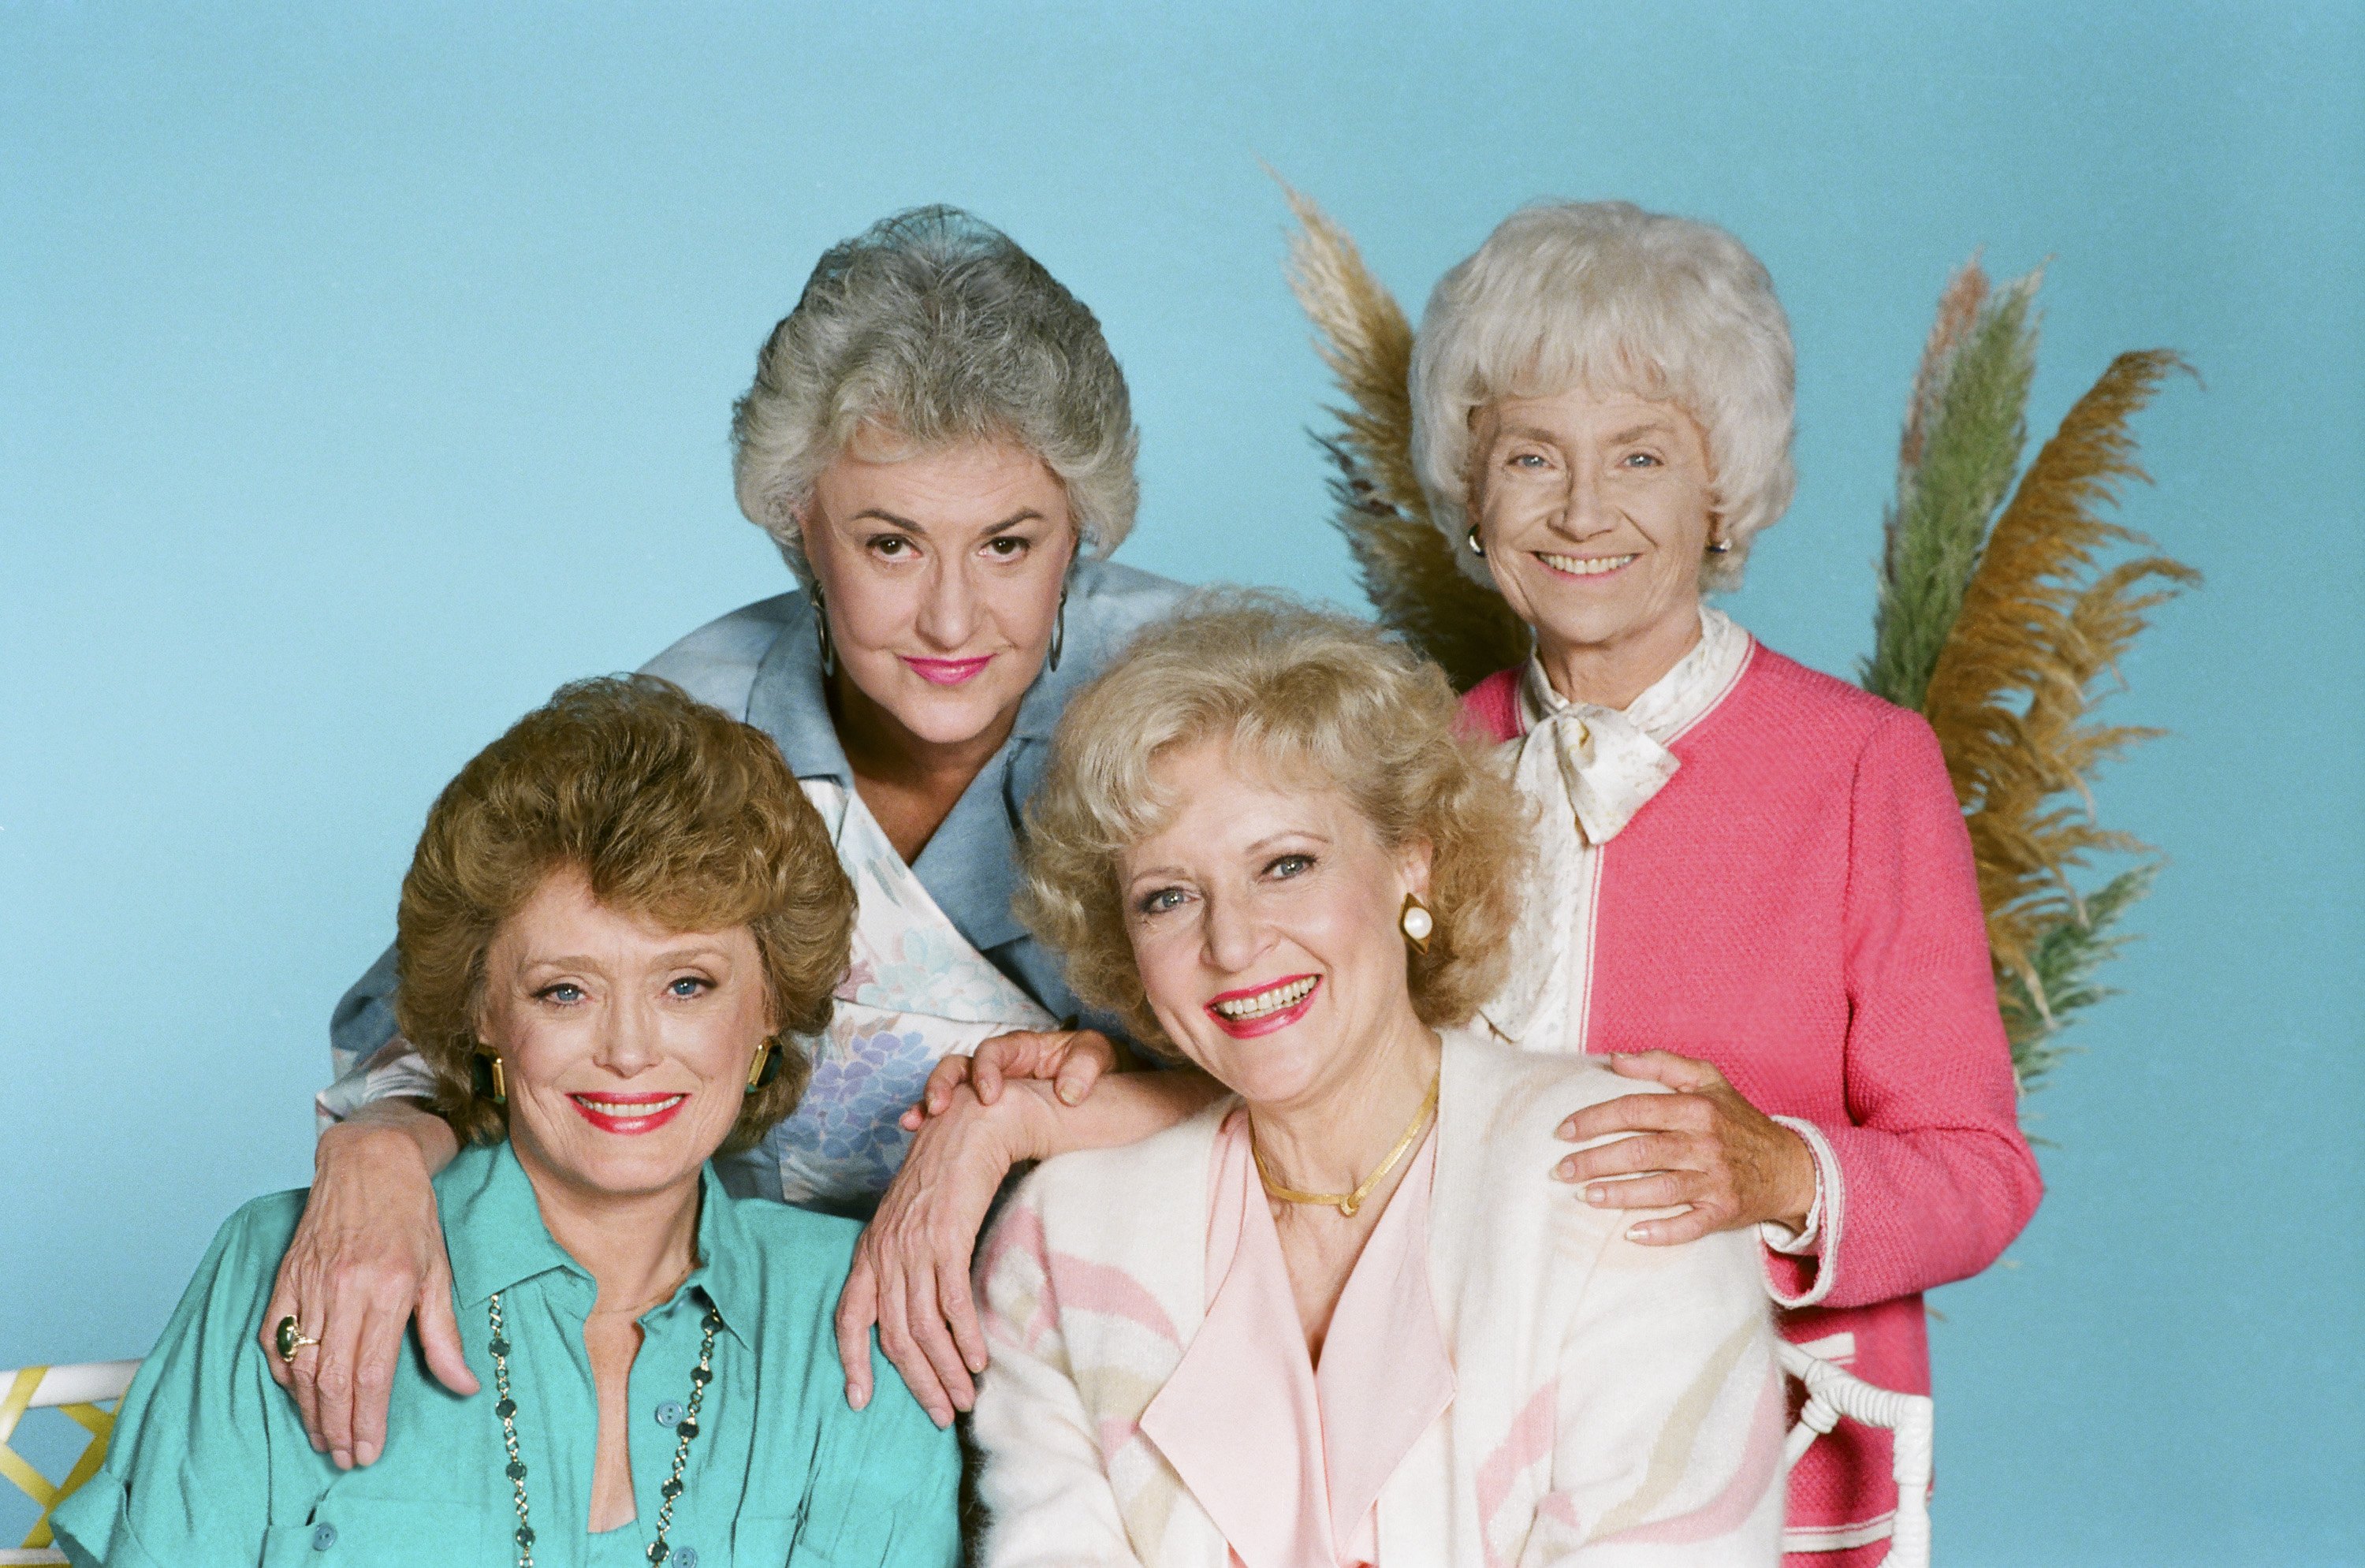 Betty White poses with the cast of 'The Golden Girls'